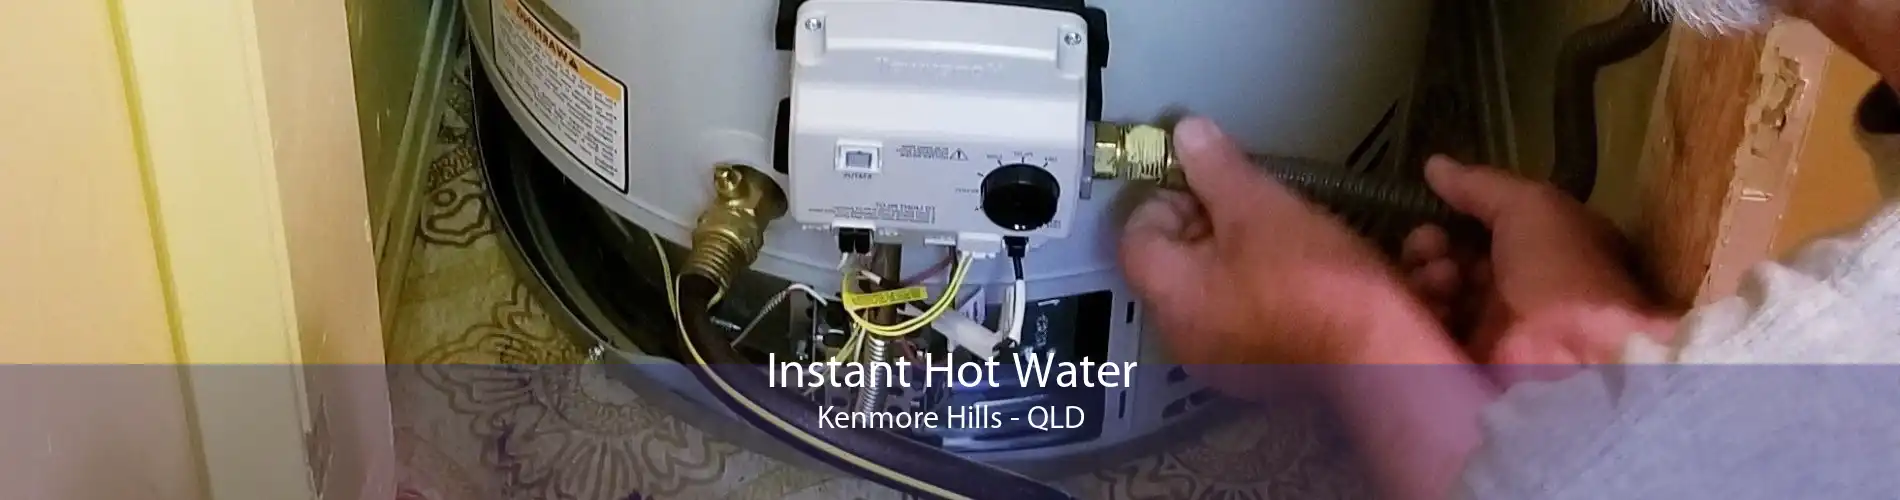 Instant Hot Water Kenmore Hills - QLD